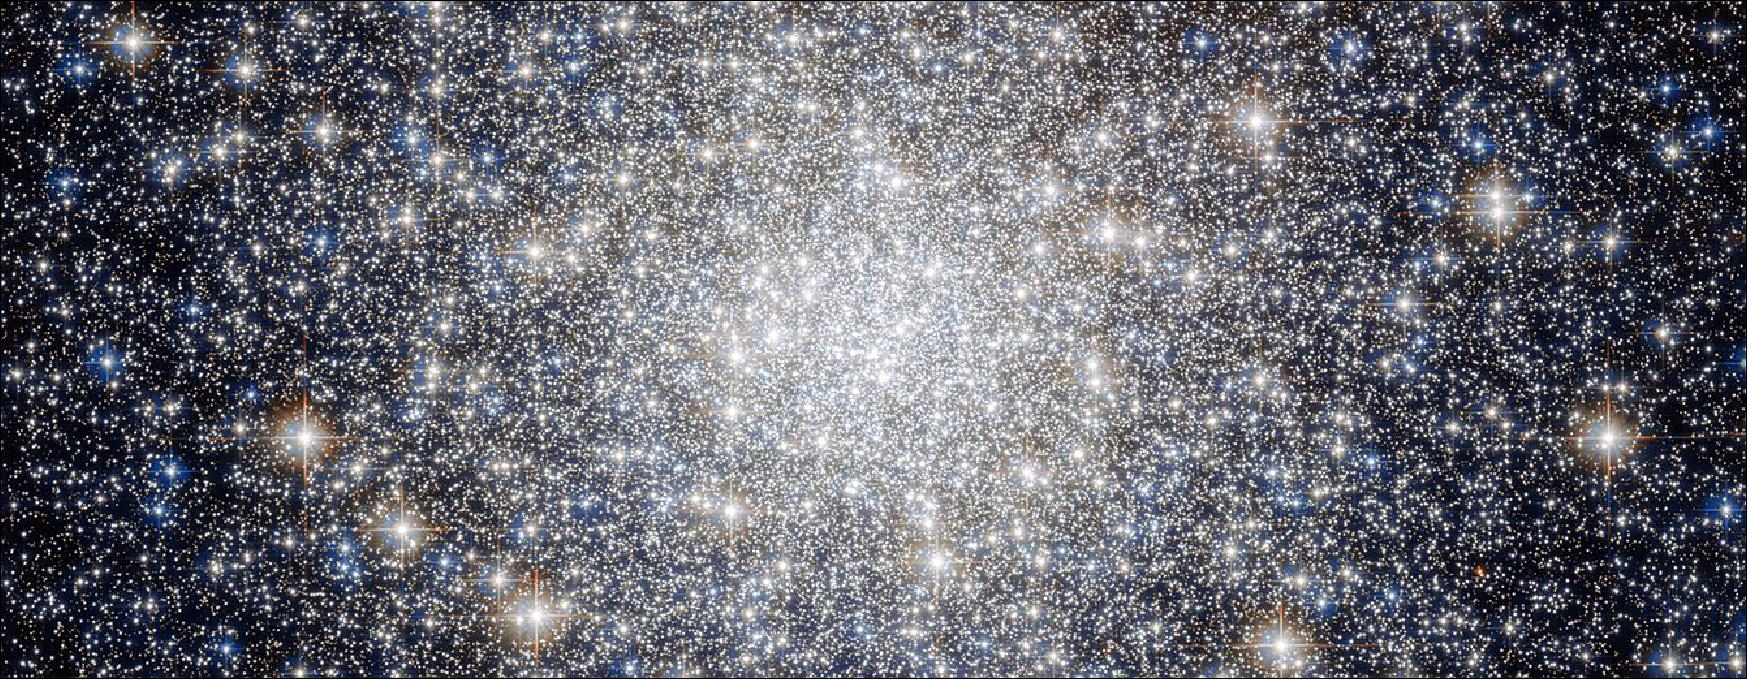 Figure 20: This image from NASA’s Hubble Space Telescope shows the heart of the globular star cluster Messier 92 (M92), one of the oldest and brightest in the Milky Way. The cluster packs roughly 330,000 stars tightly together, and they orbit the center of the galaxy en masse. NASA’s James Webb Space Telescope will observe M92, or a similar globular cluster, early in its mission to demonstrate its ability to distinguish the light of its individual stars in a densely packed environment. Webb’s high resolution and sensitivity will provide scientists a wealth of detailed star data relevant to many areas of astronomy, including the stellar lifecycle and the evolution of the universe (image credit: NASA, ESA, and Gilles Chapdelaine)